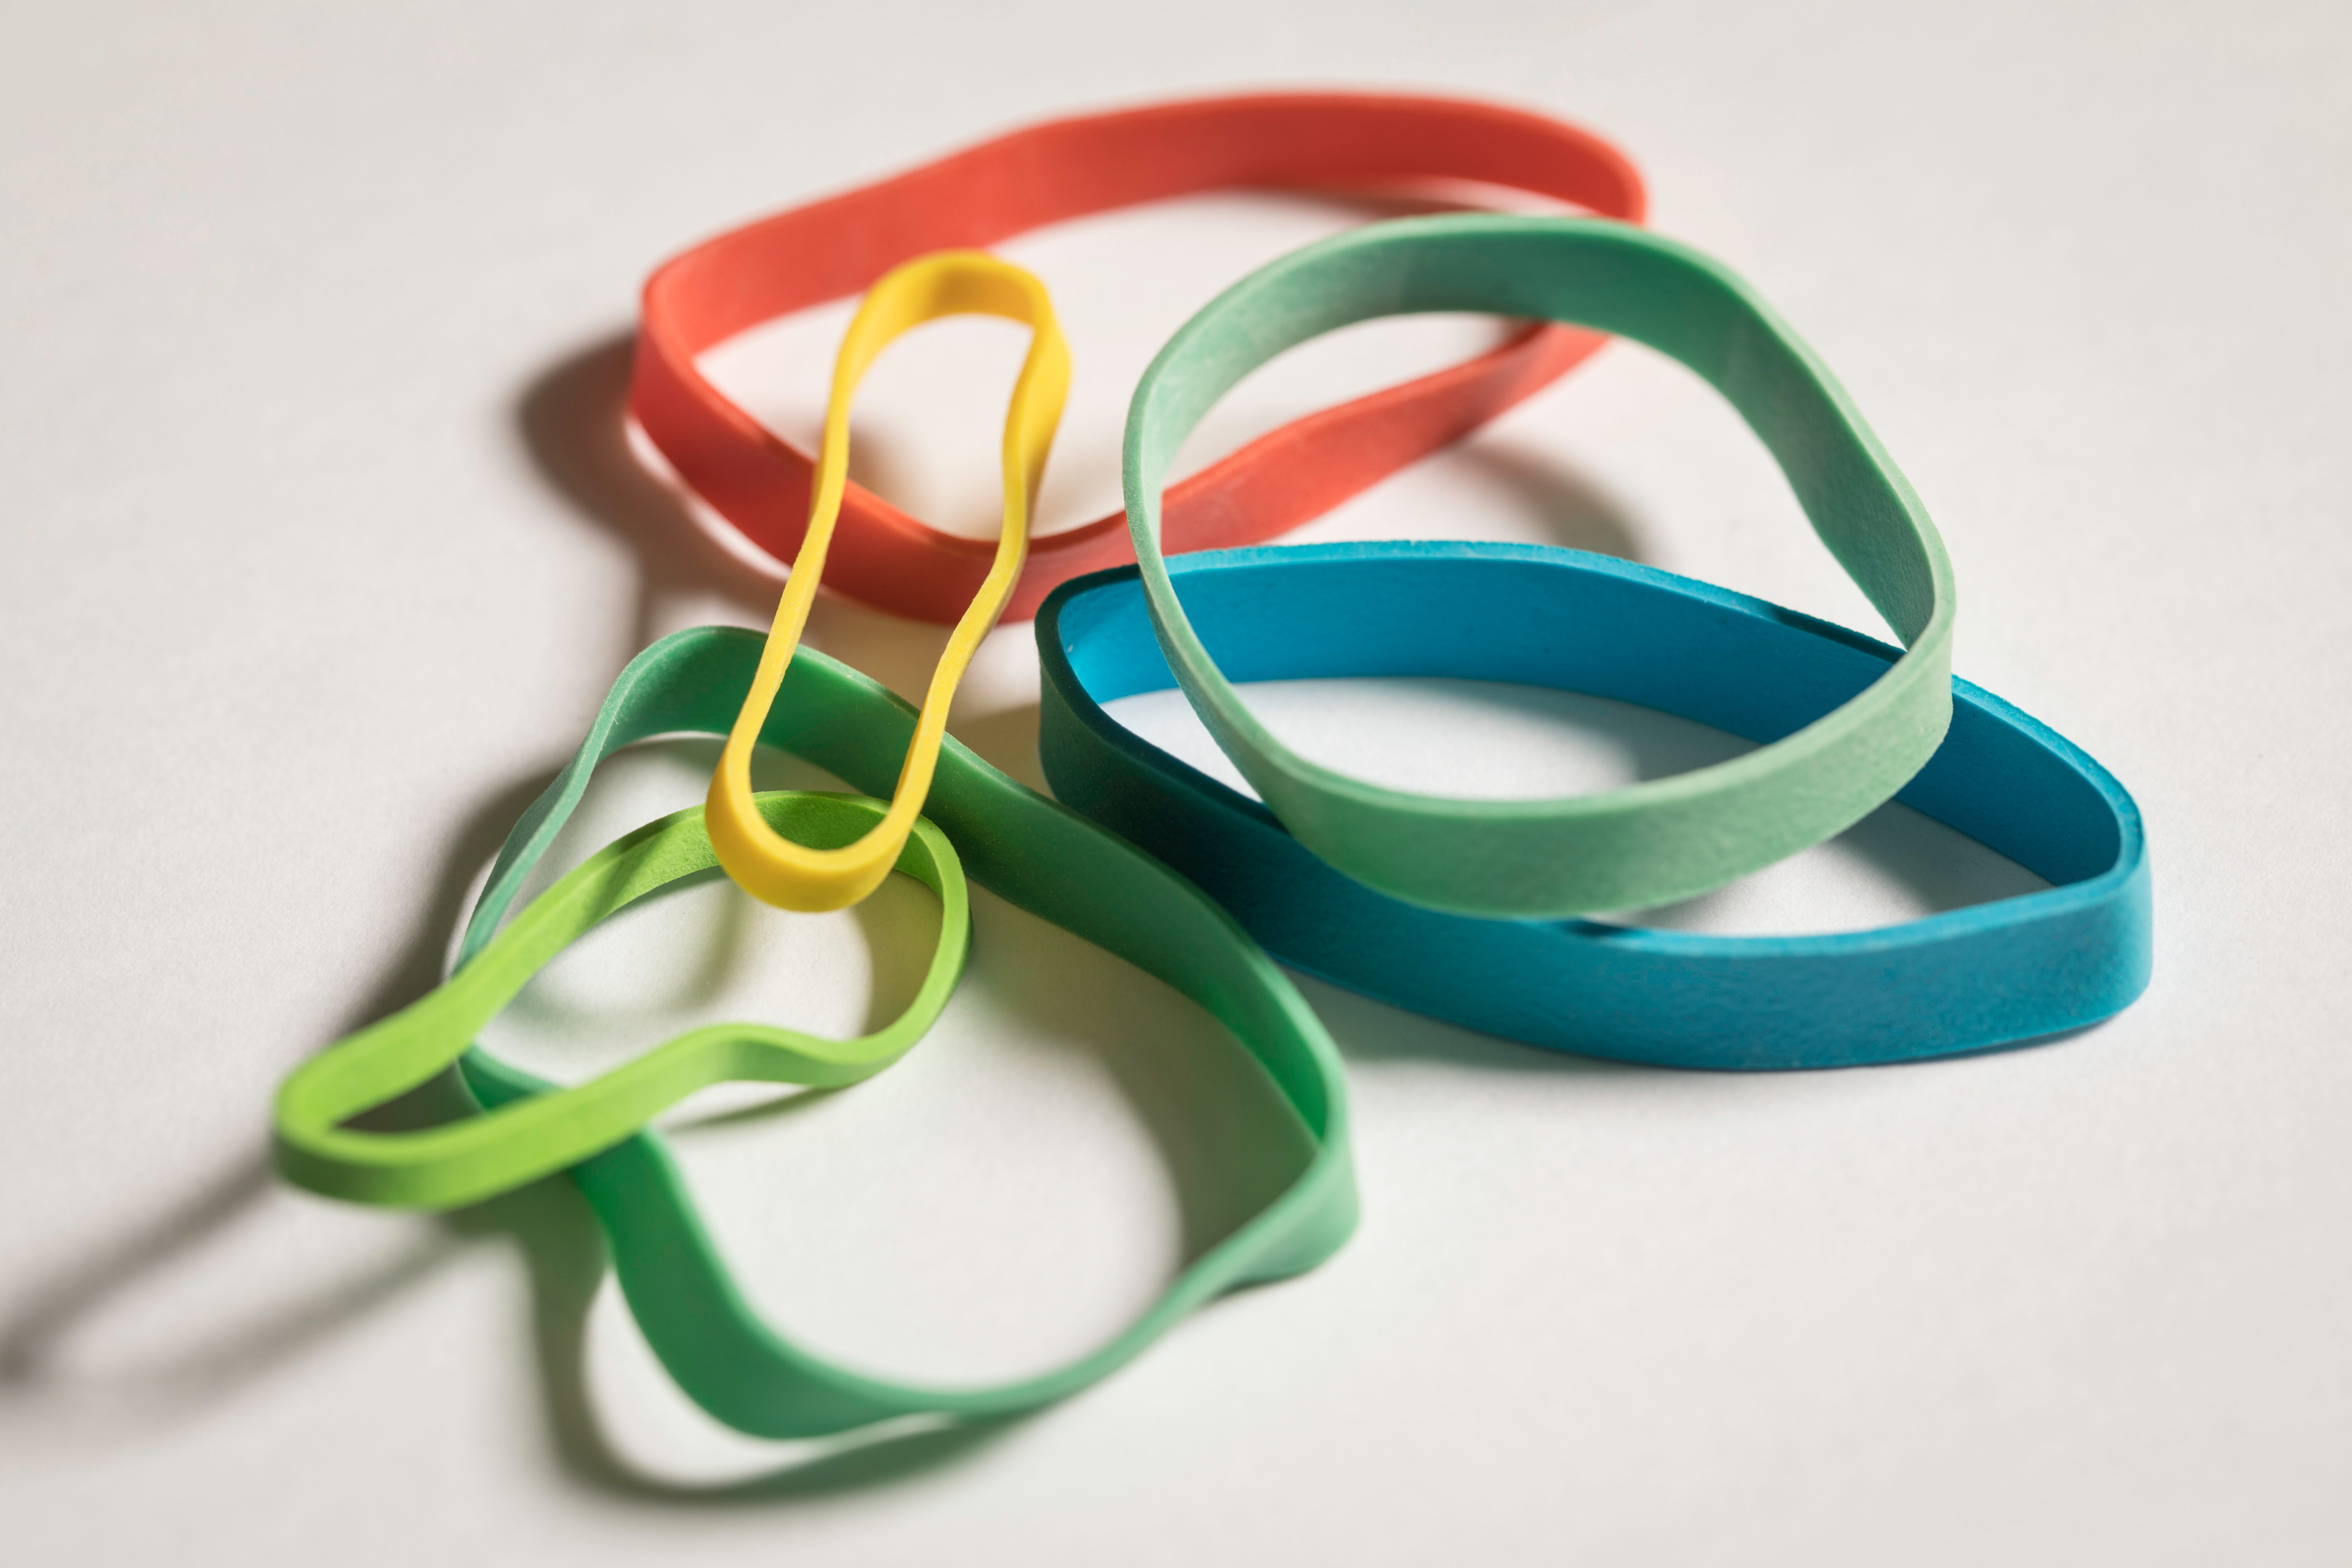 Colored Rubber Bands